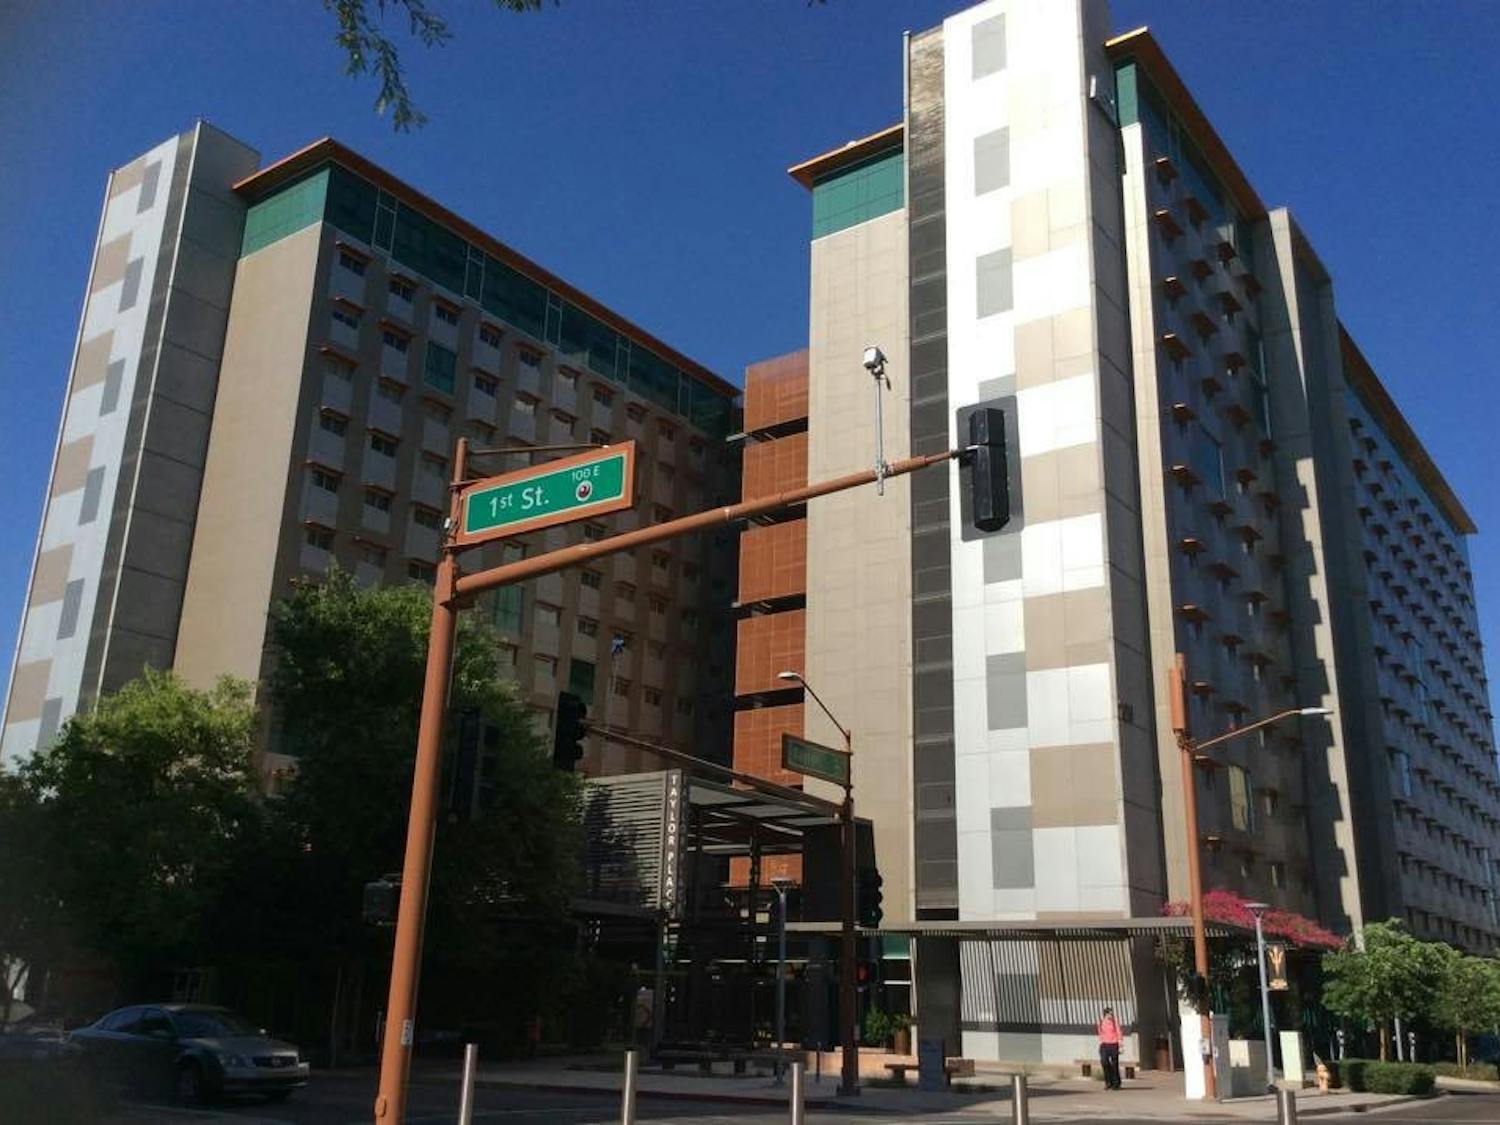 ASU's dormitory Taylor Place is located near many academic buildings making it a short walk to class.